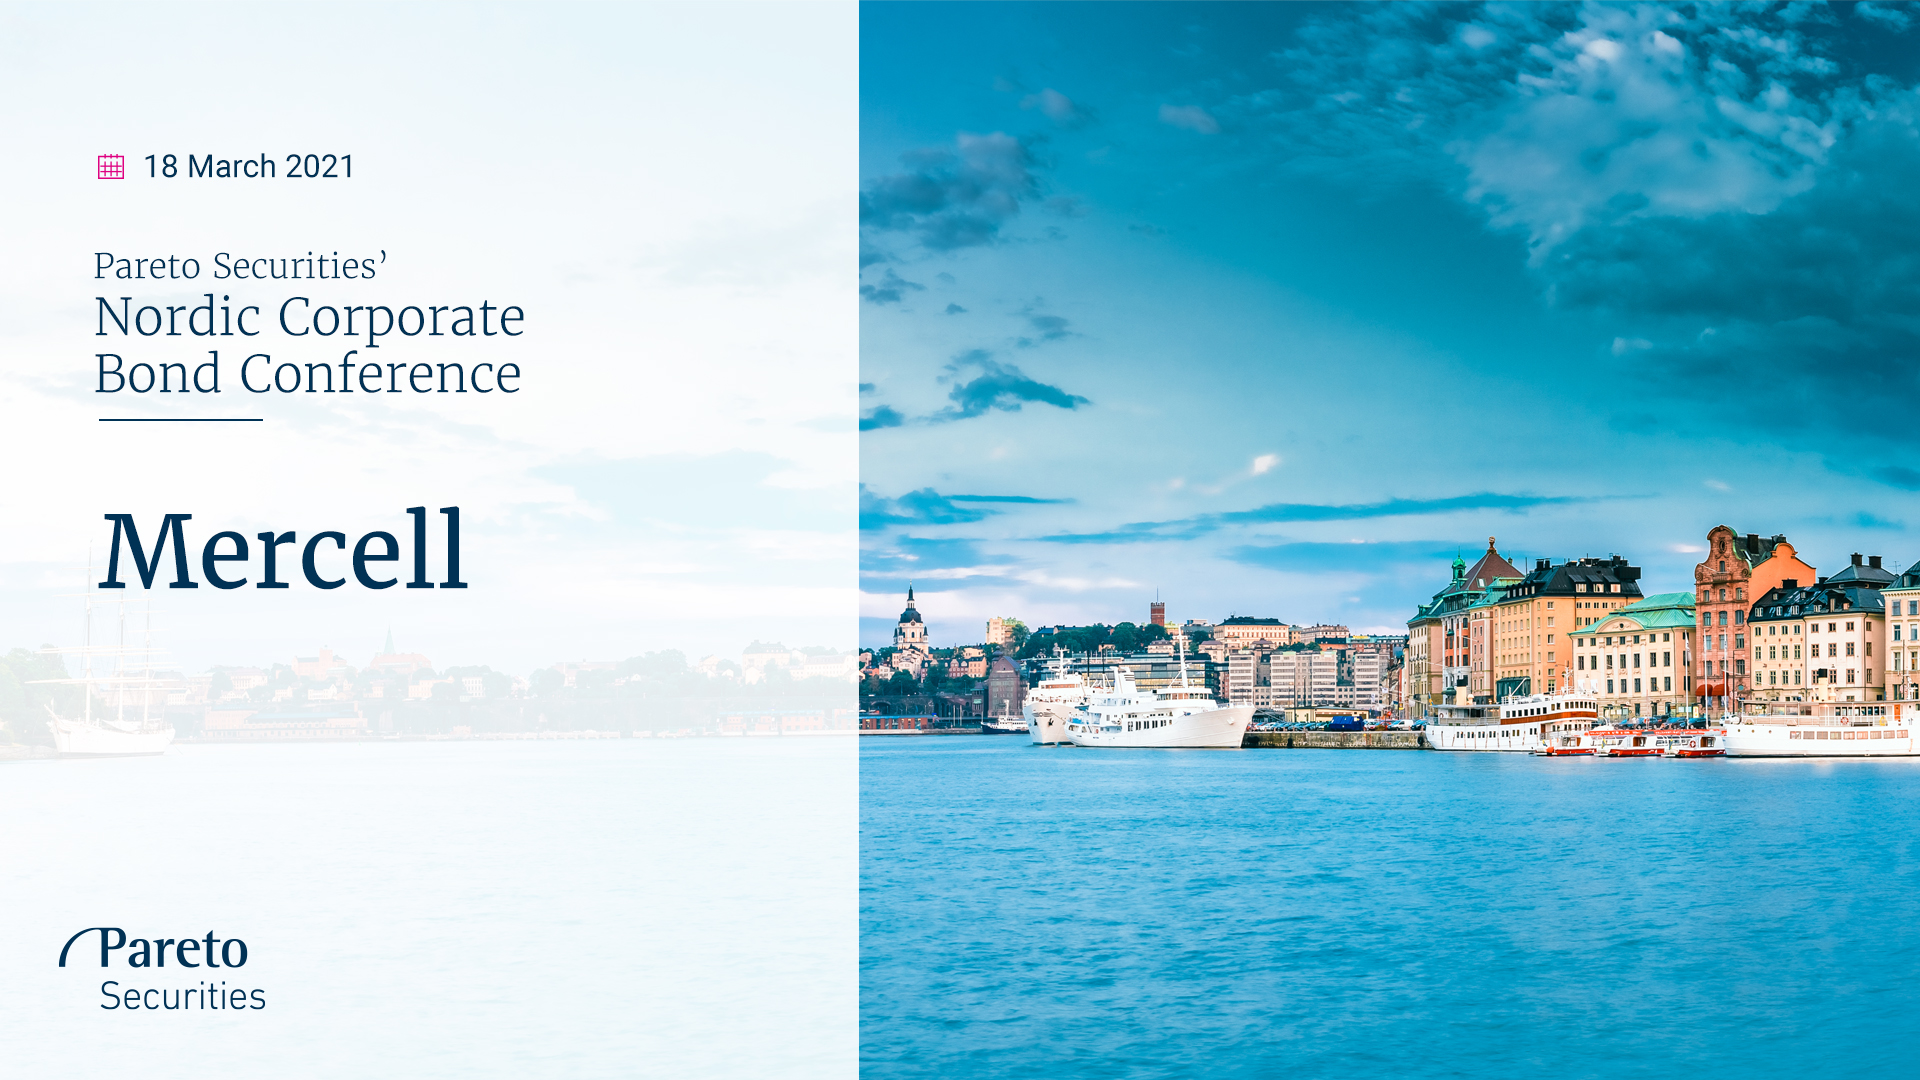 Mercell / Pareto Securities' Nordic Corporate Bond Conference